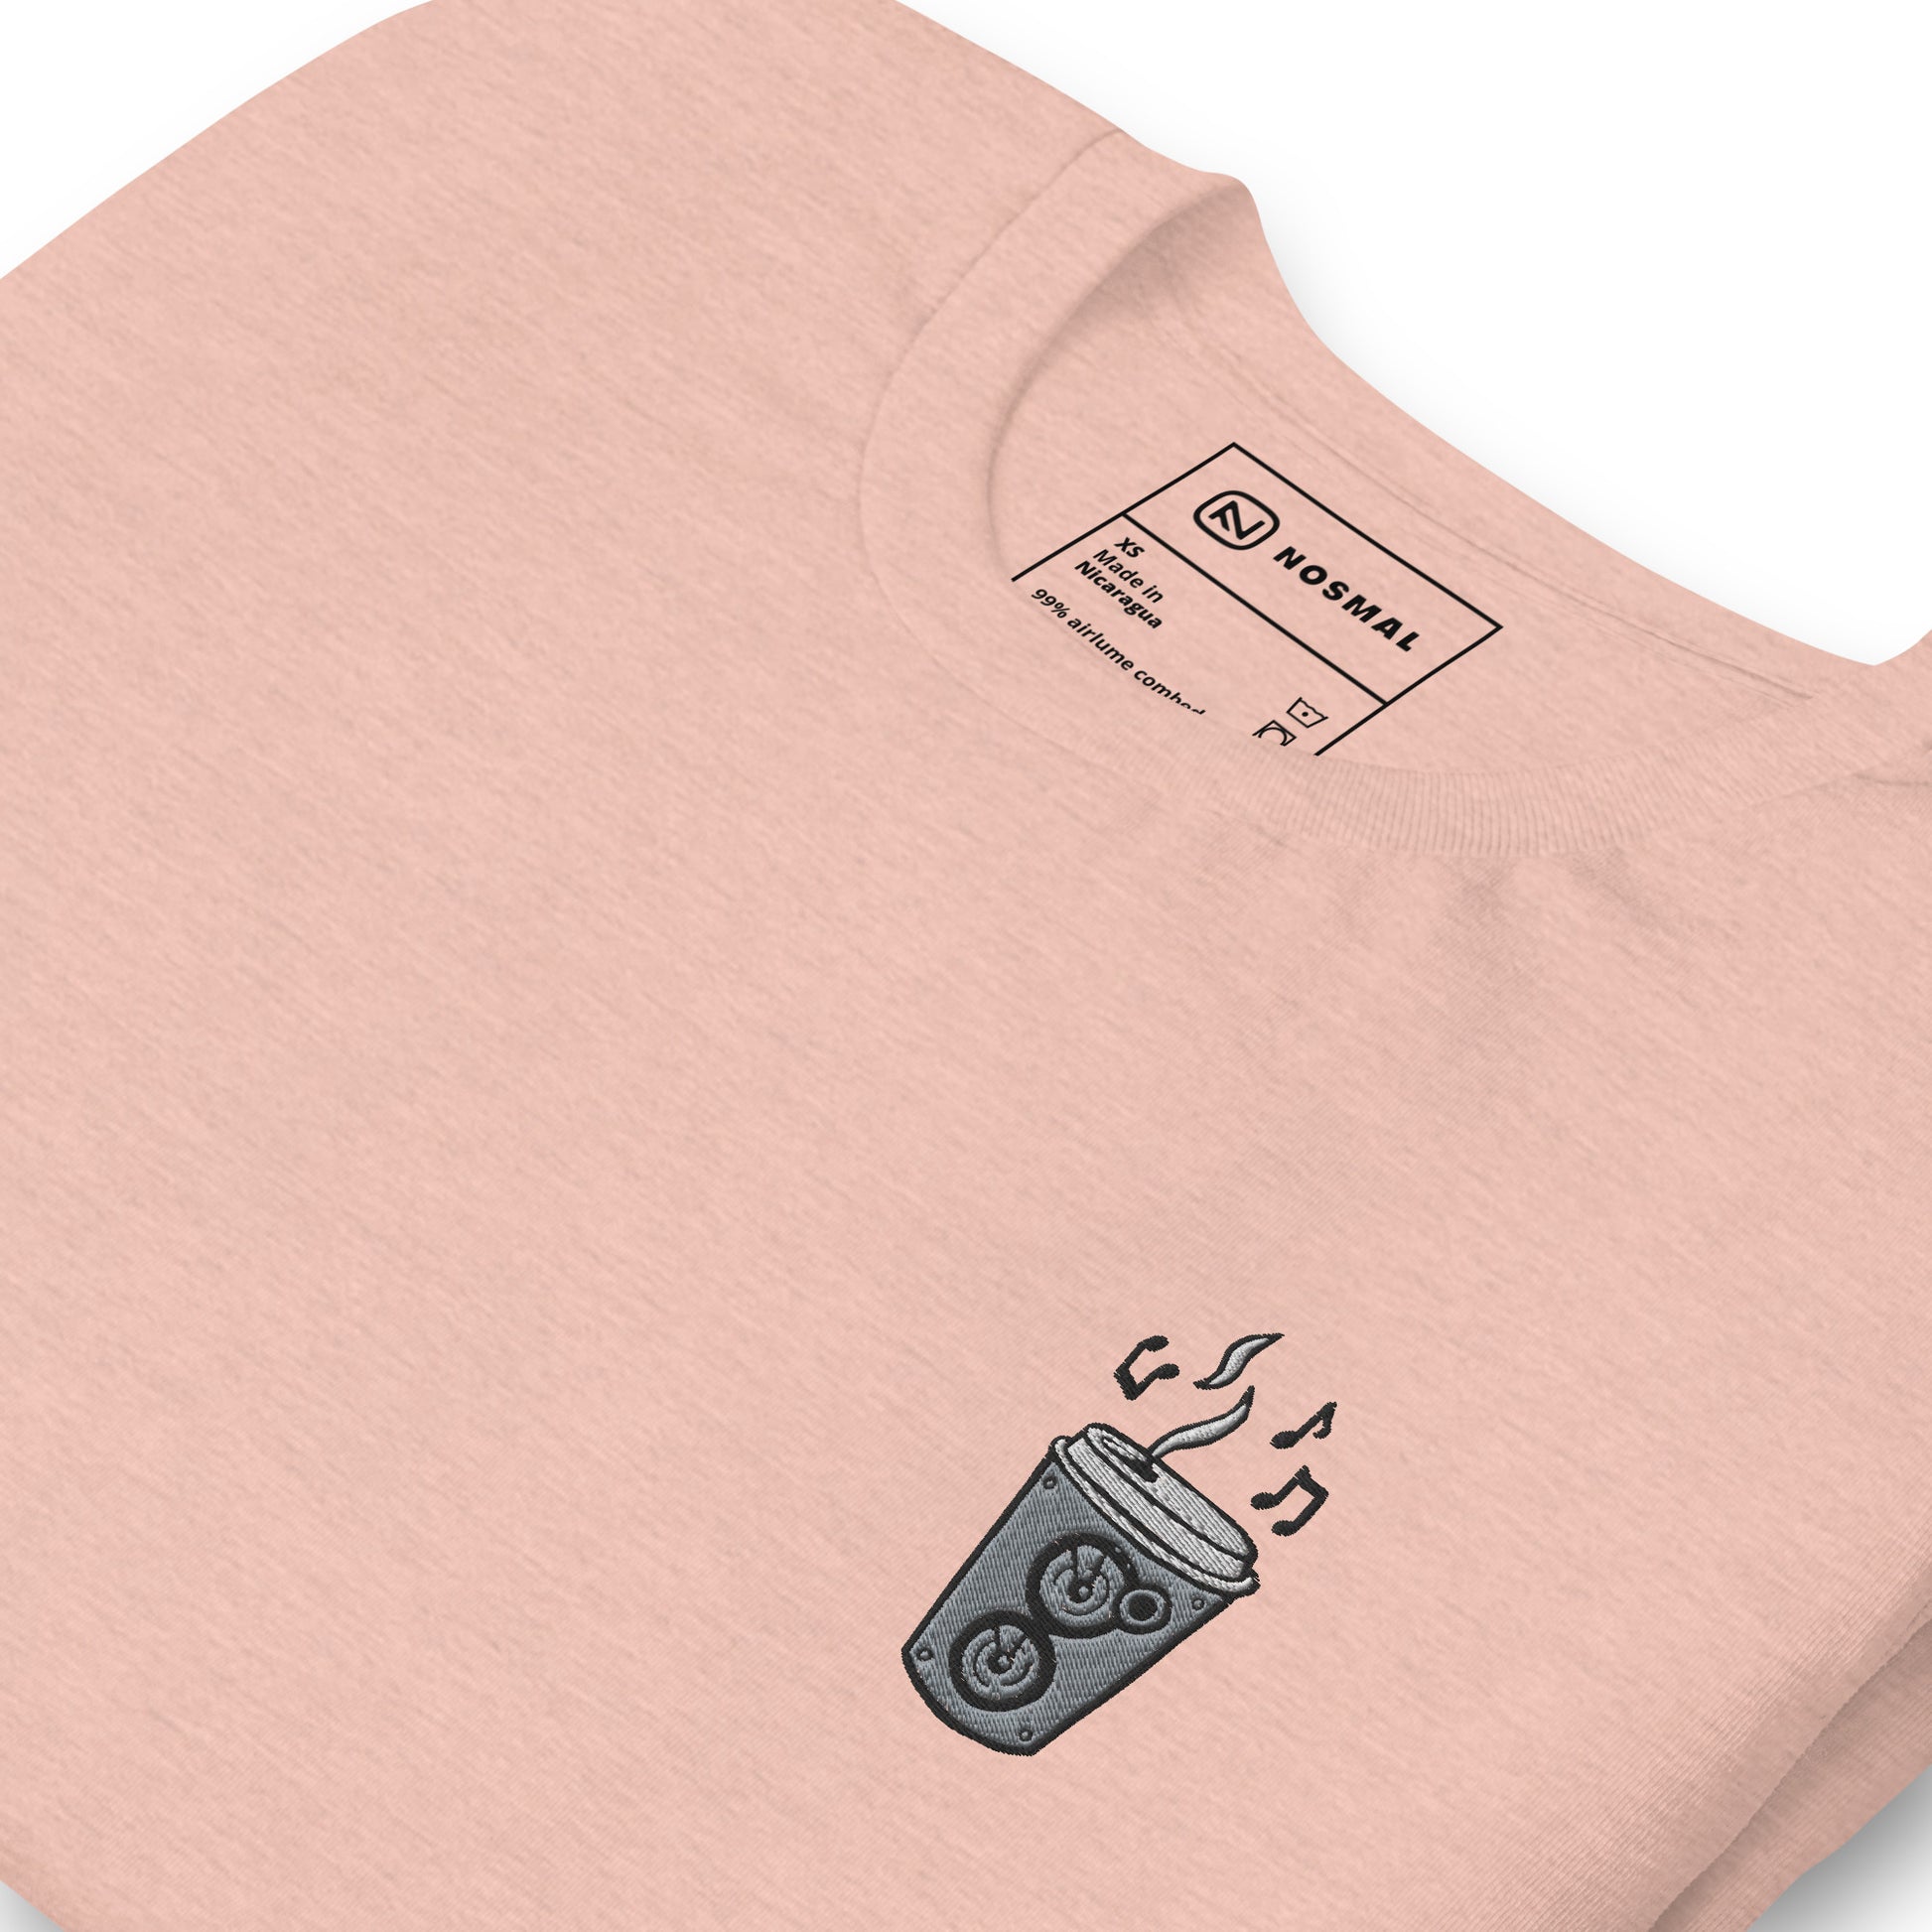 Angled close up shot of the coffee is my jam embroidered designon heather prism peach unisex t-shirt.